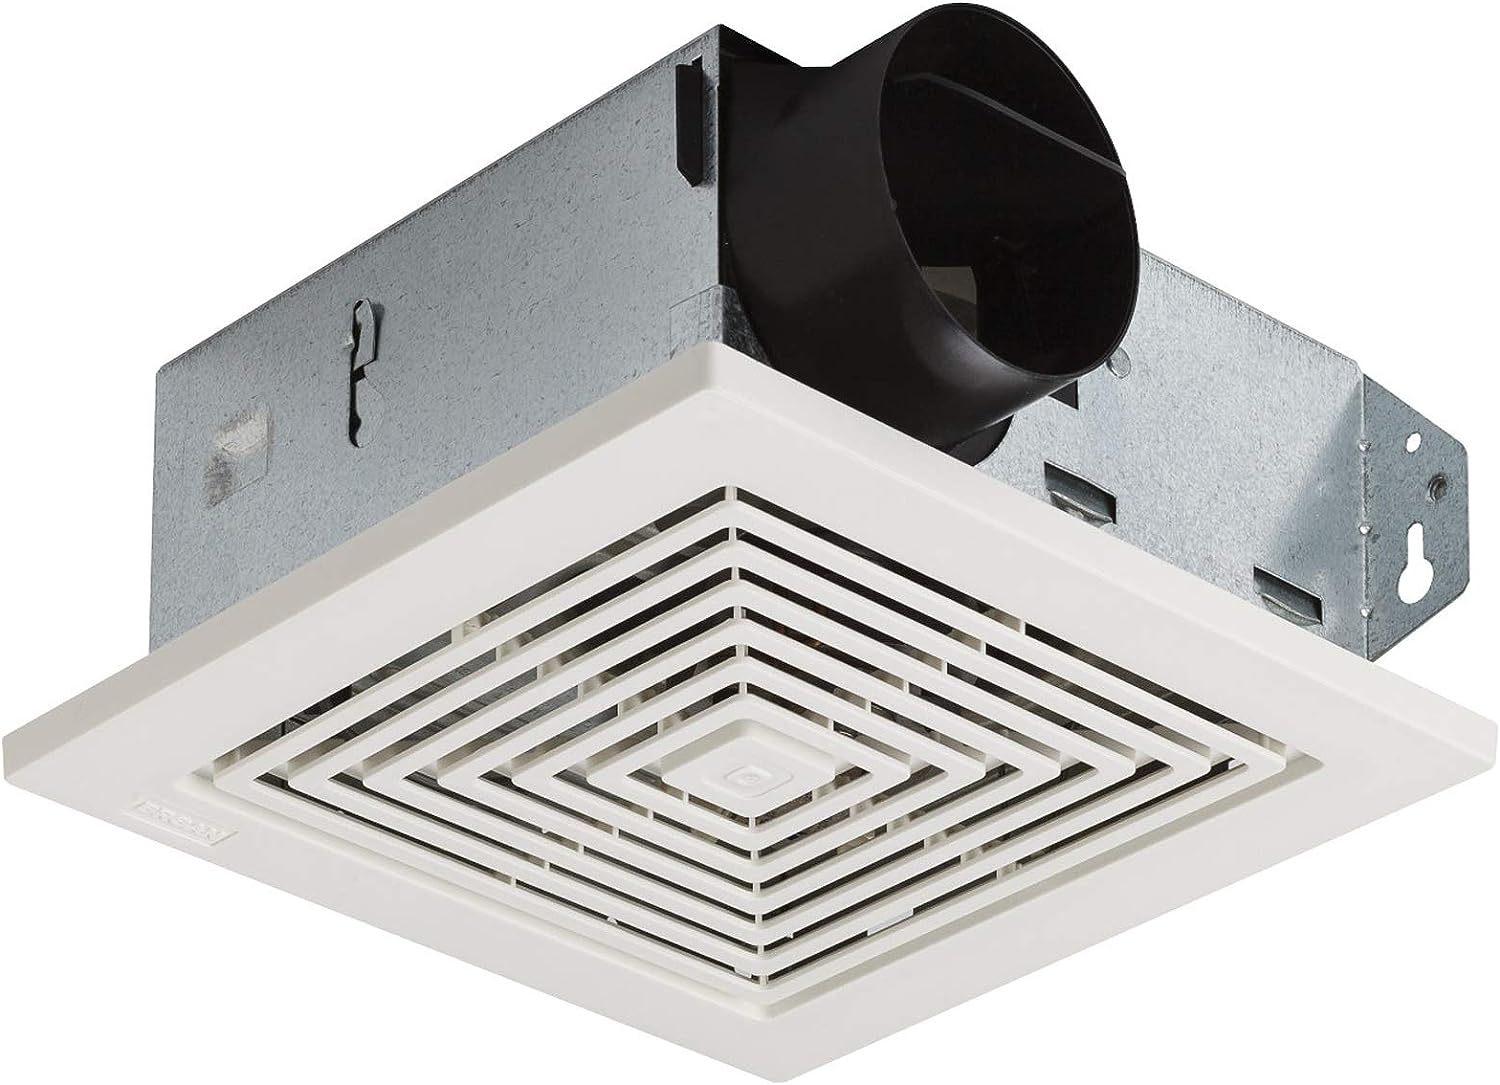 Broan-NuTone 688 Ceiling and Wall Ventilation, 50 CFM [...]